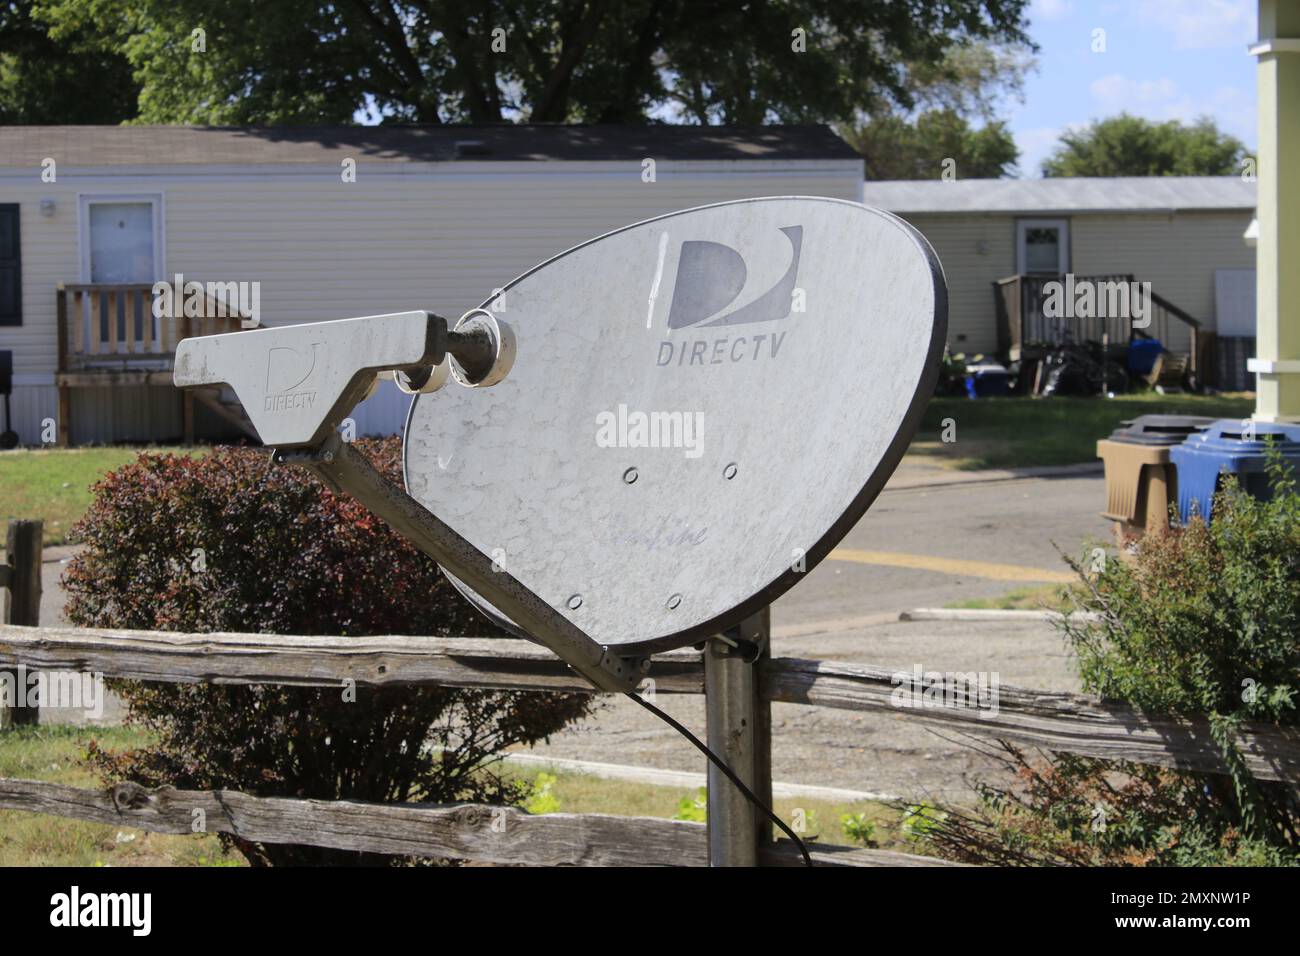 Direct TV Satellite in a yard shot closeup with trees in the background Stock Photo